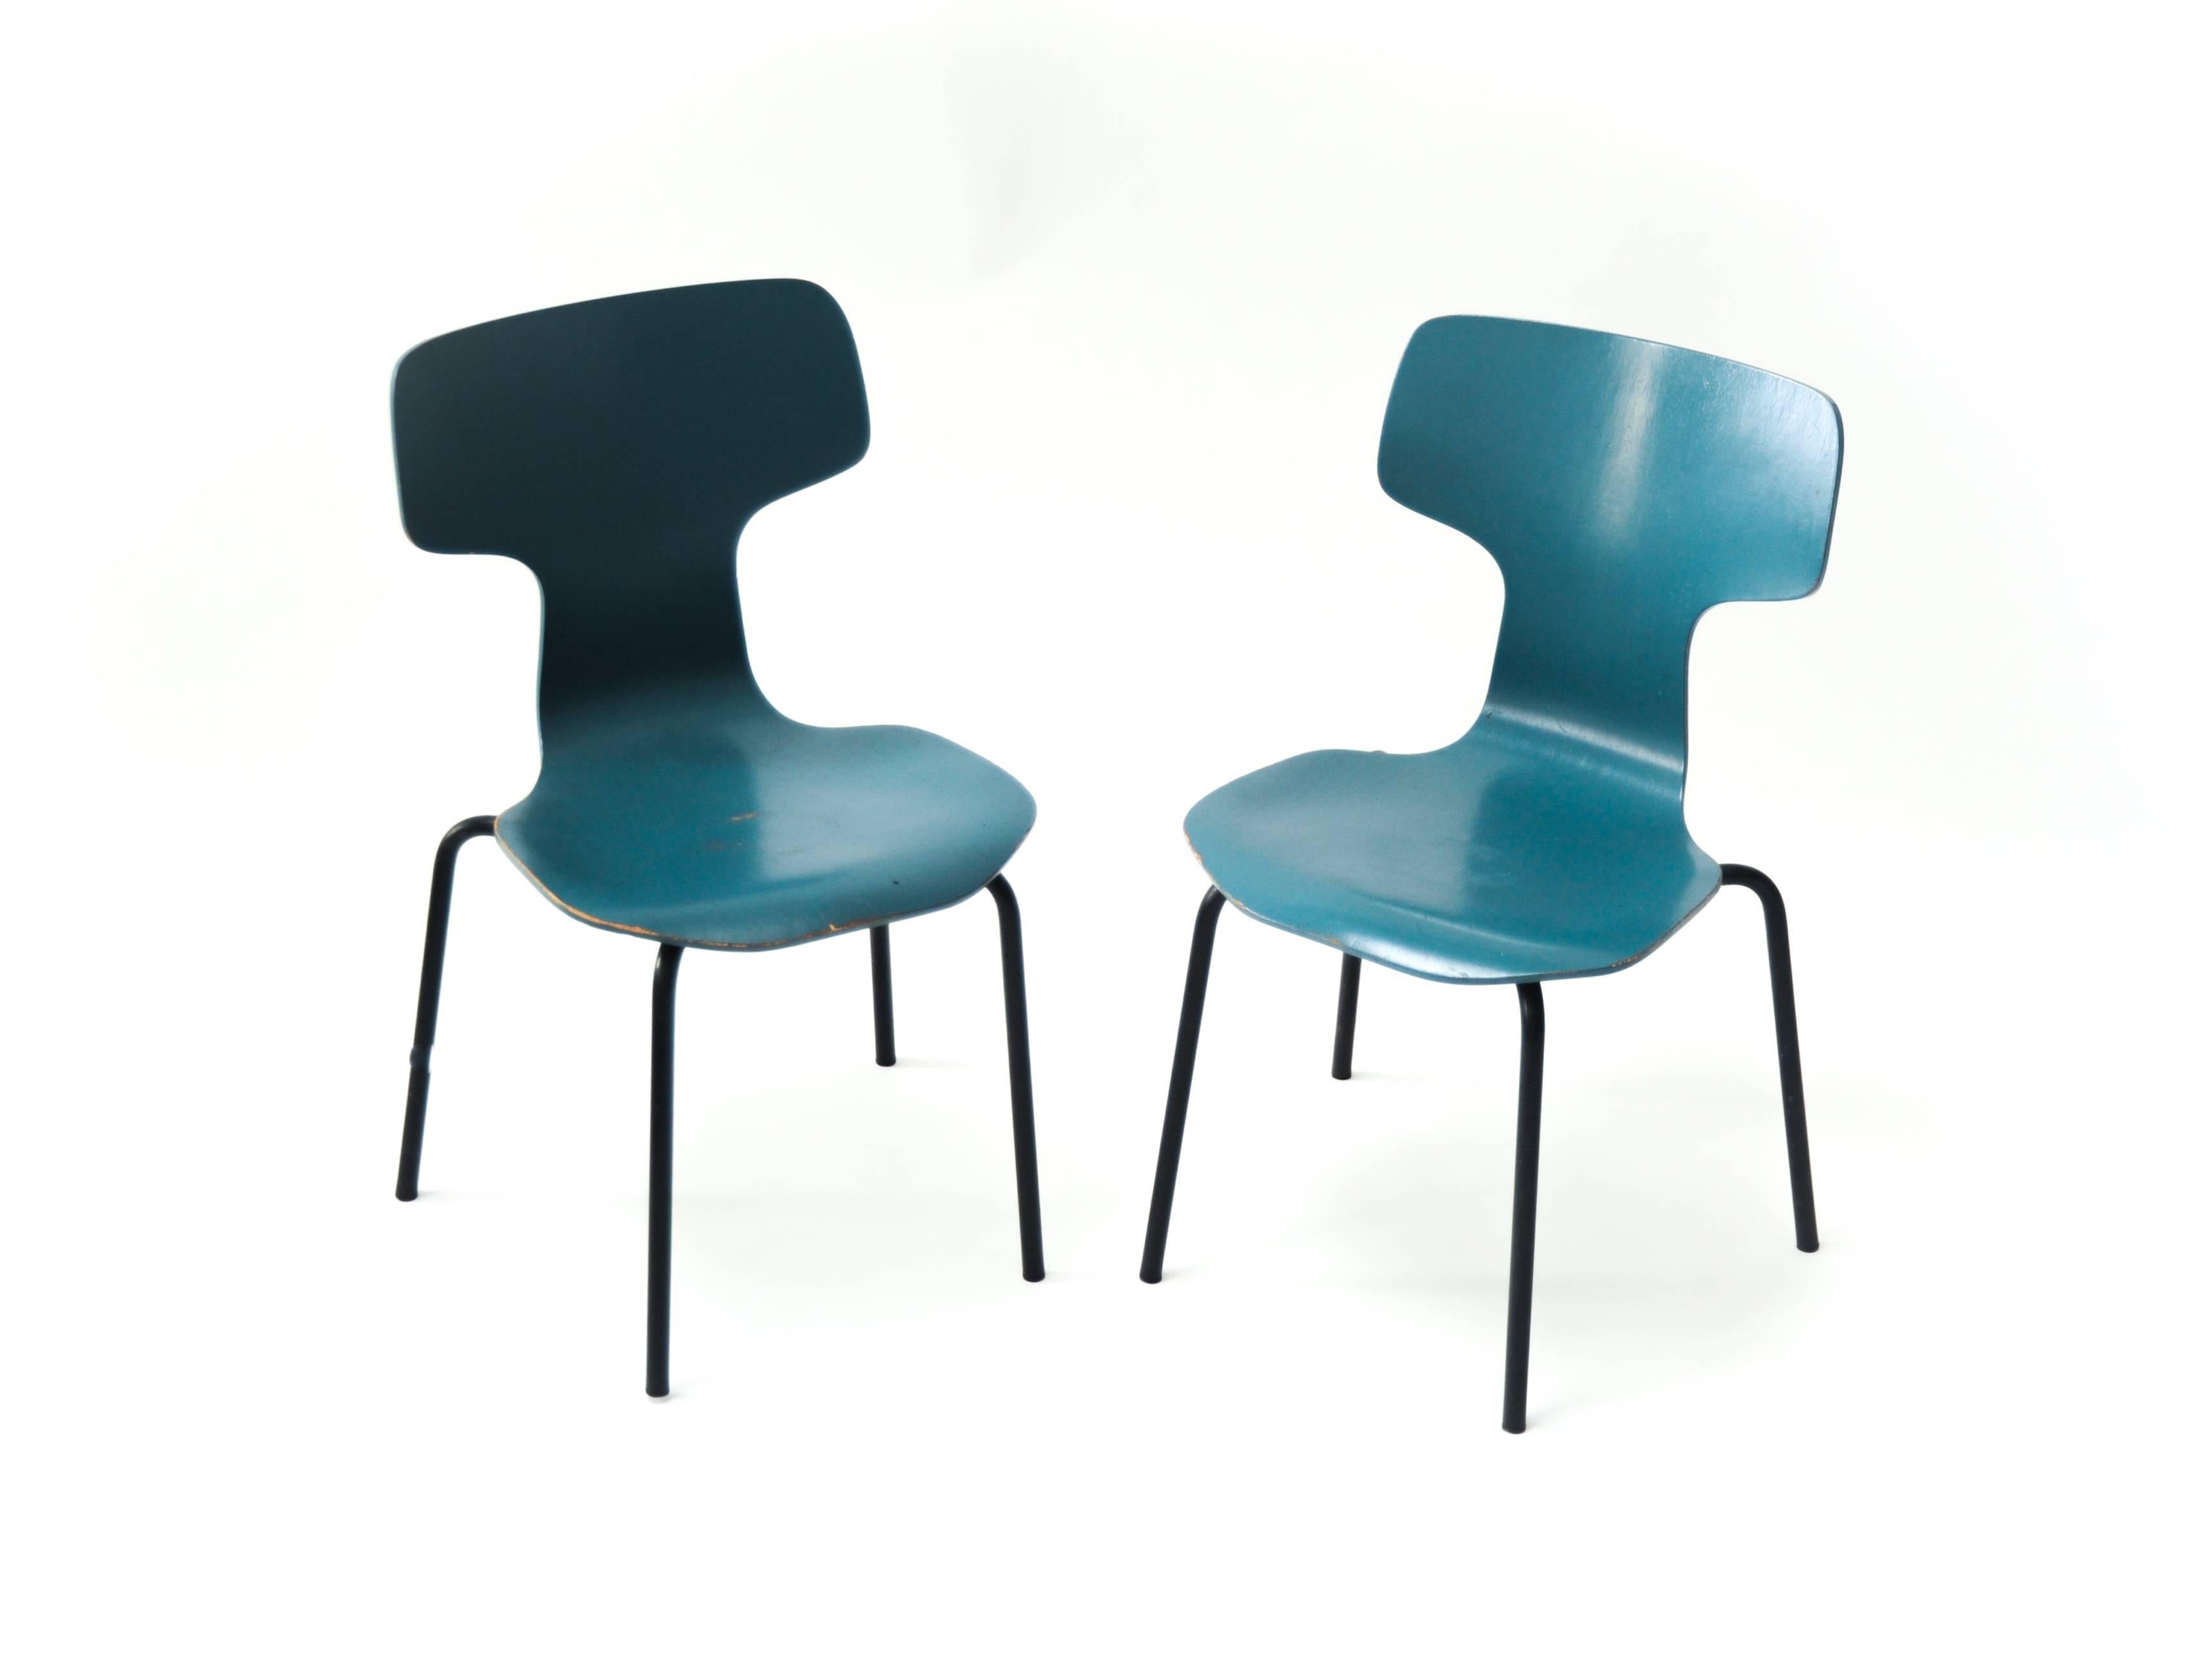 20th Century Pair of Model 3103 Chairs, Designed by Arne Jacobsen, Vintage, Denmark, 1955 For Sale